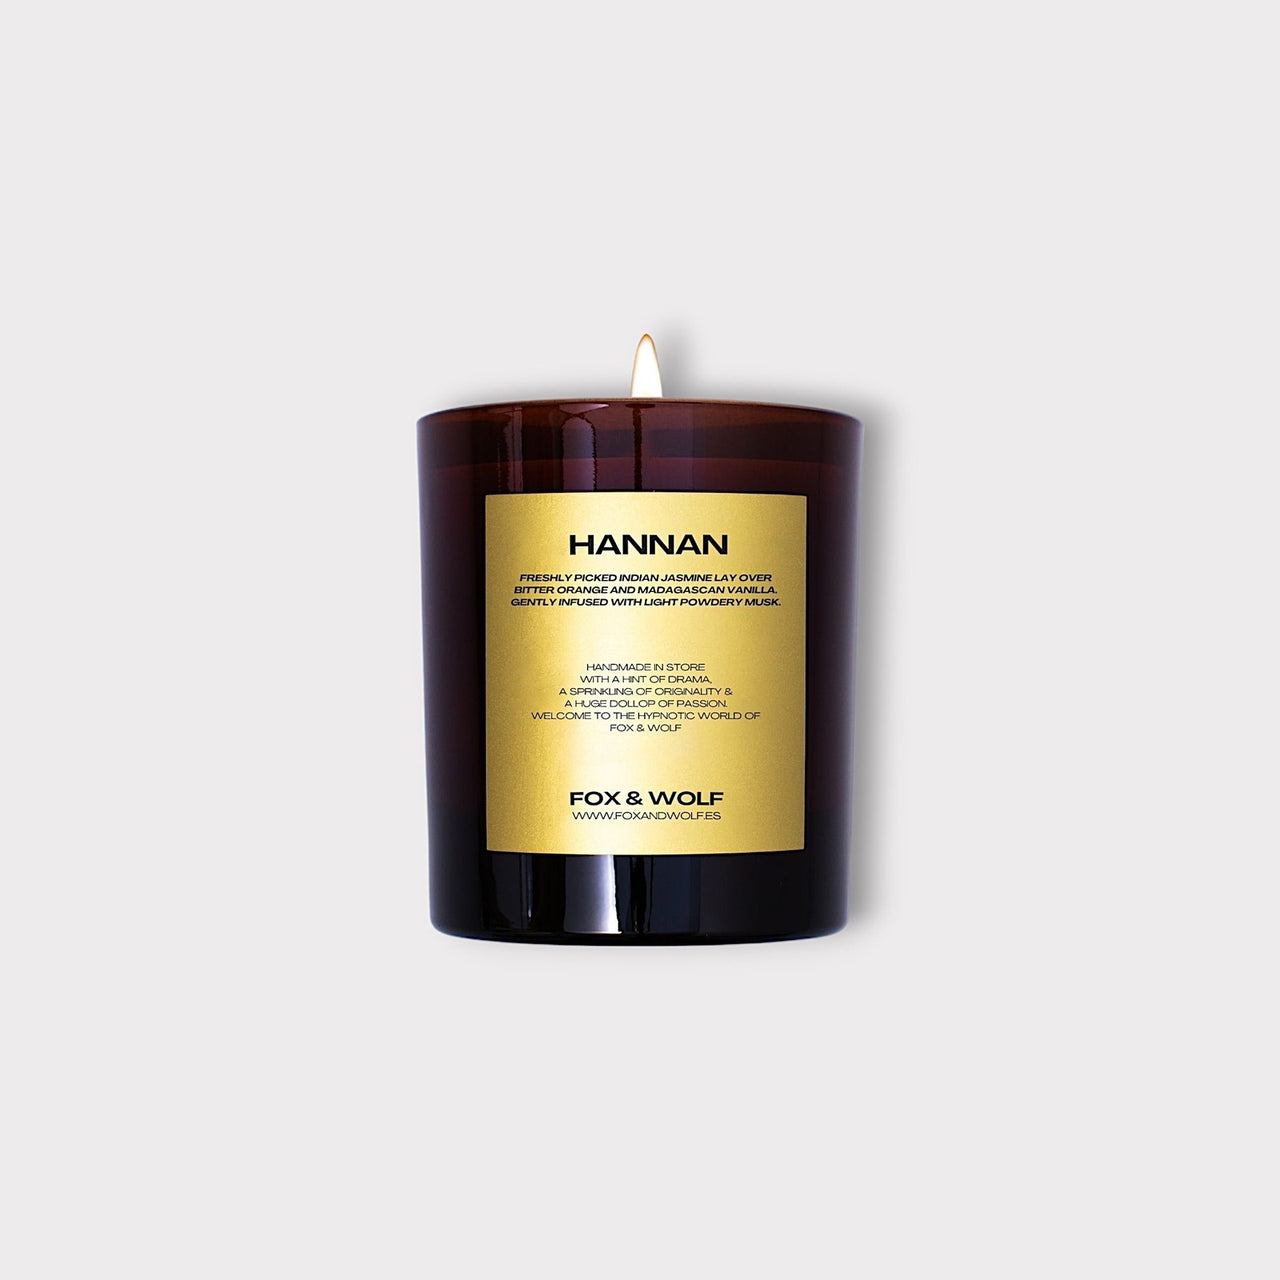 300 G HANNAN SCENTED CANDLE